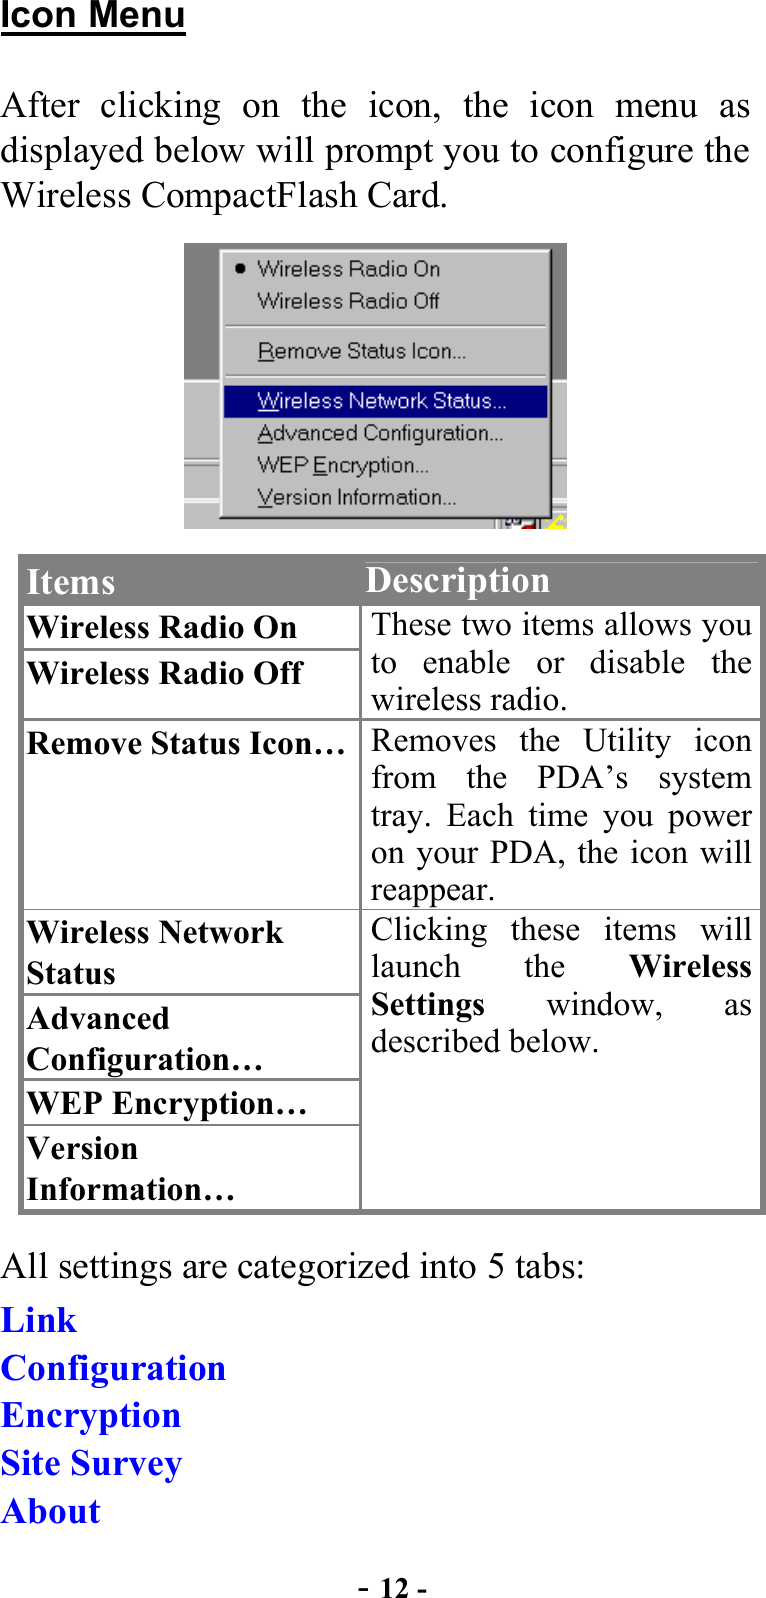  - 12 - Icon Menu After clicking on the icon, the icon menu as displayed below will prompt you to configure the Wireless CompactFlash Card.  Items  Description Wireless Radio On Wireless Radio Off These two items allows you to enable or disable the wireless radio. Remove Status Icon…  Removes the Utility icon from the PDA’s system tray. Each time you power on your PDA, the icon will reappear. Wireless Network Status Advanced Configuration… WEP Encryption… Version Information… Clicking these items will launch the Wireless Settings window, as described below. All settings are categorized into 5 tabs: Link Configuration Encryption Site Survey About 